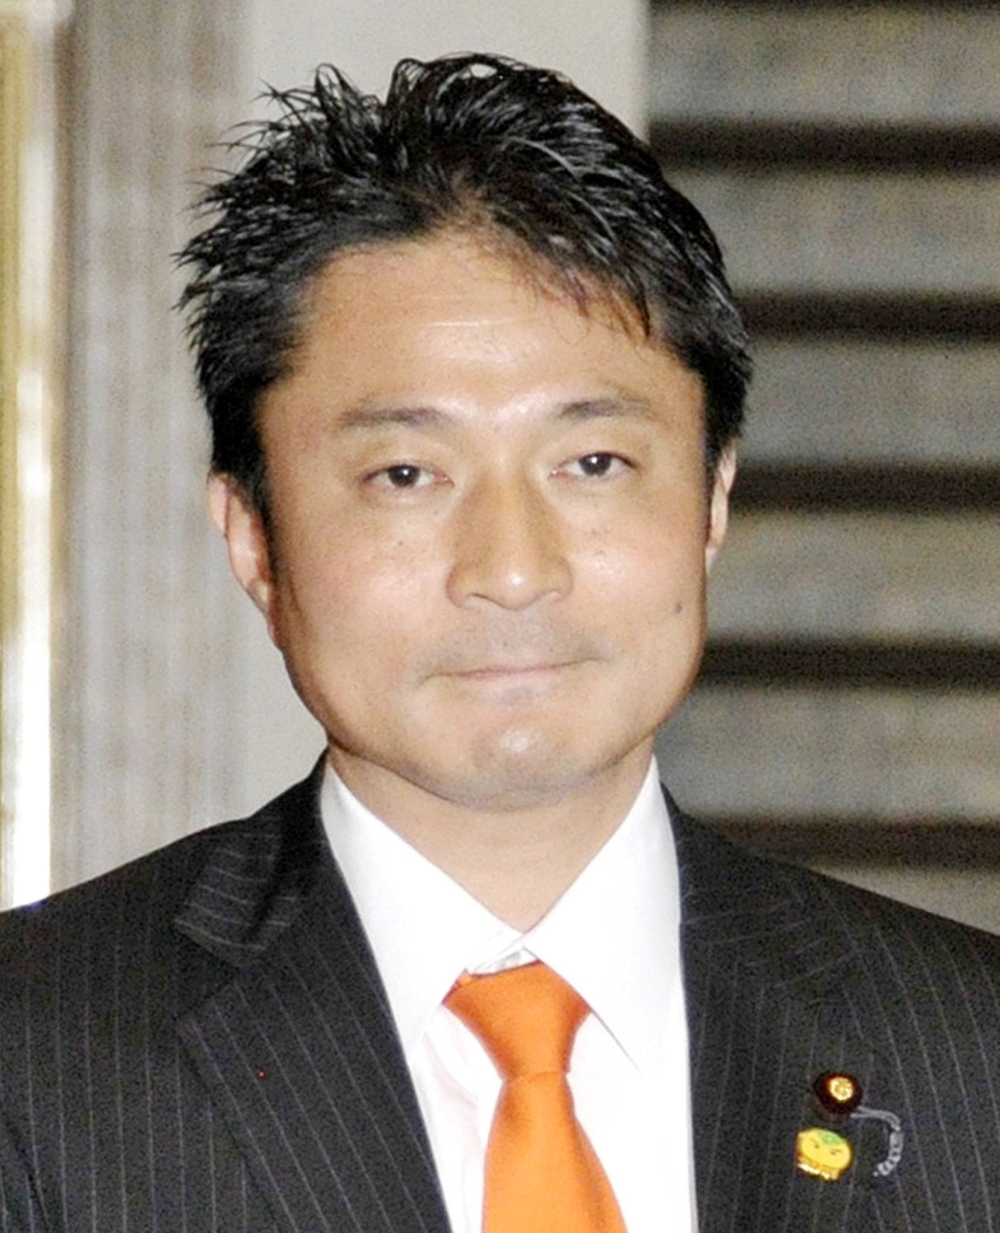 Liberal Democratic Party lawmaker Mito Kakizawa was sentenced Thursday to two years in prison, suspended for five years, for an illegal campaign finance offense related to a Tokyo ward election in April last year.